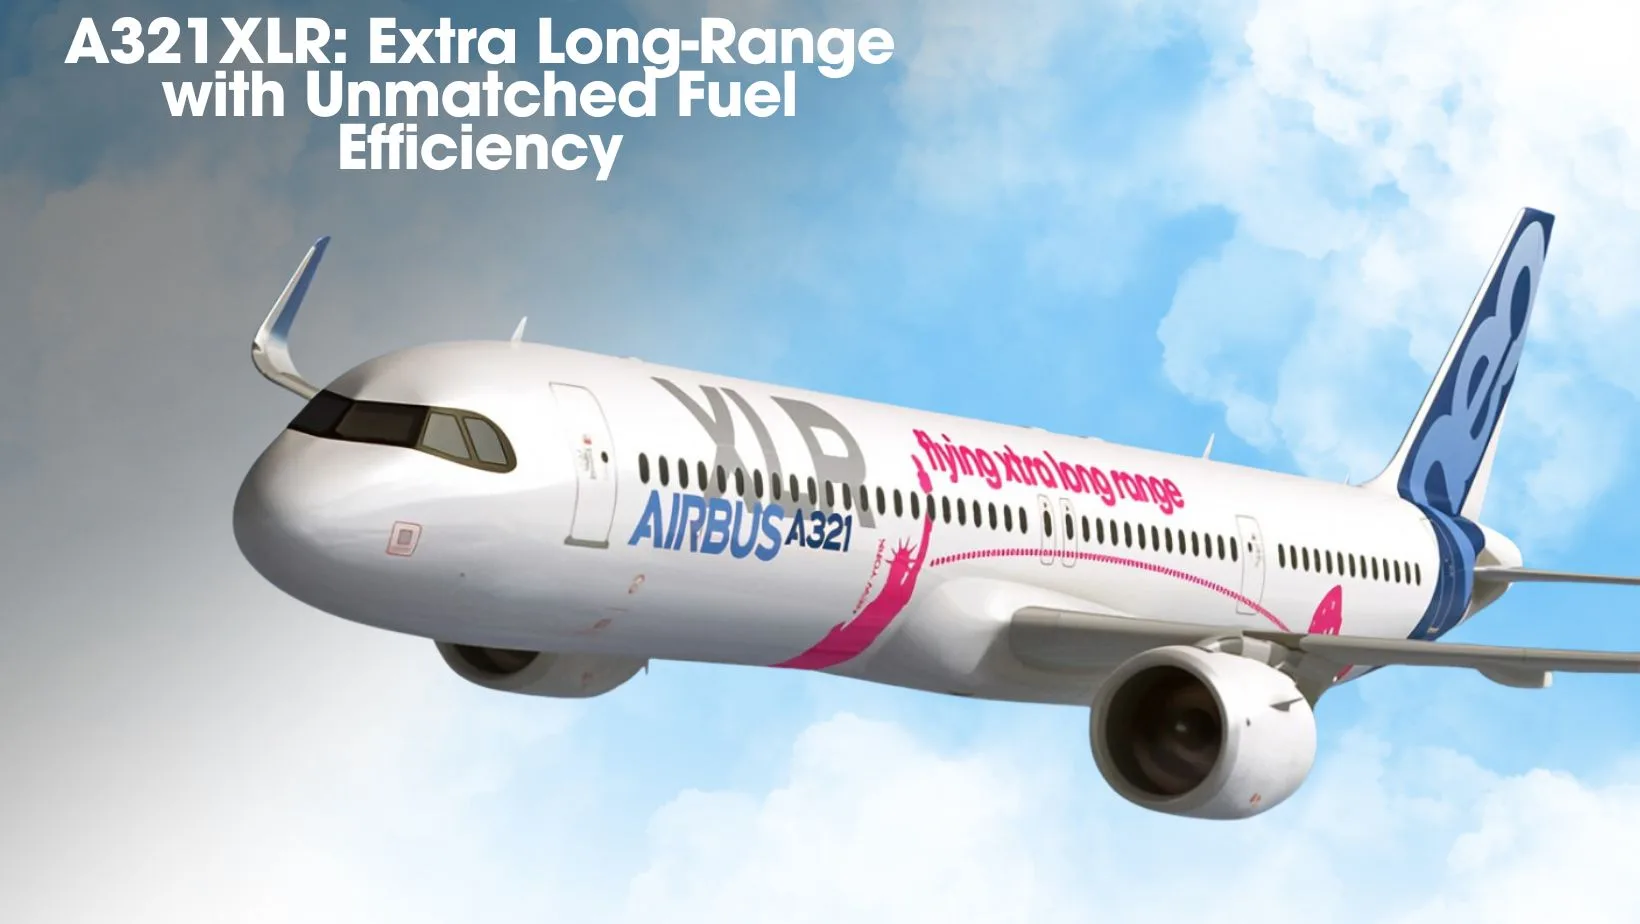 A321XLR: Extra Long-Range with Unmatched Fuel Efficiency